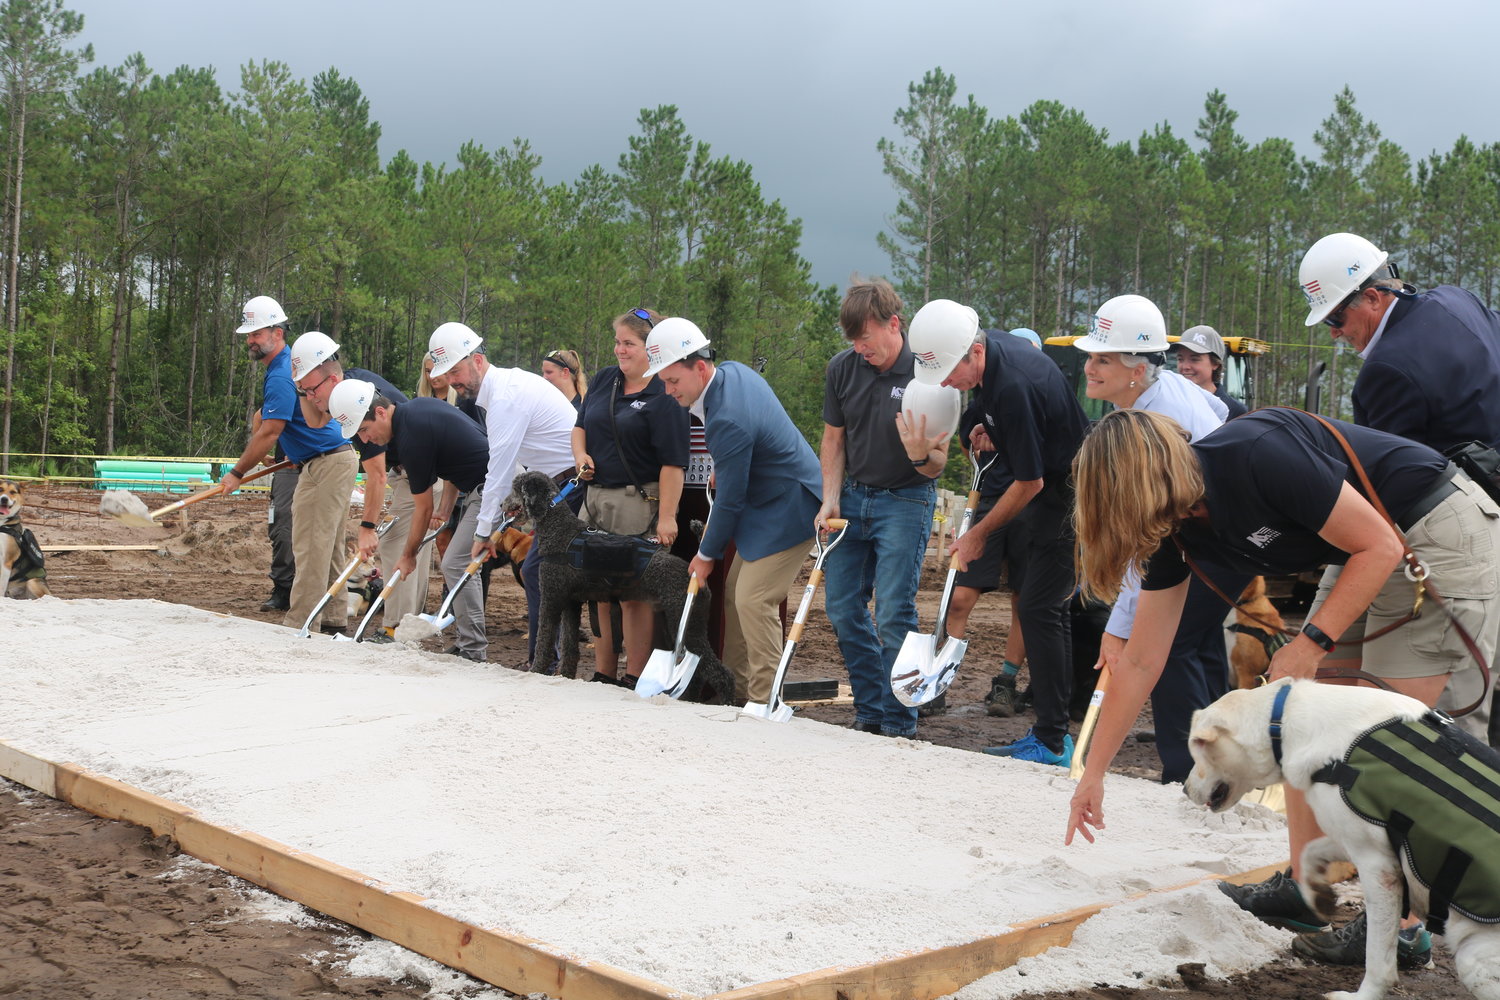 Members of the K9s For Warriors team grab their shovels and break ground on the future site of the Campus for K9 Operations during a ceremony on Aug. 4.